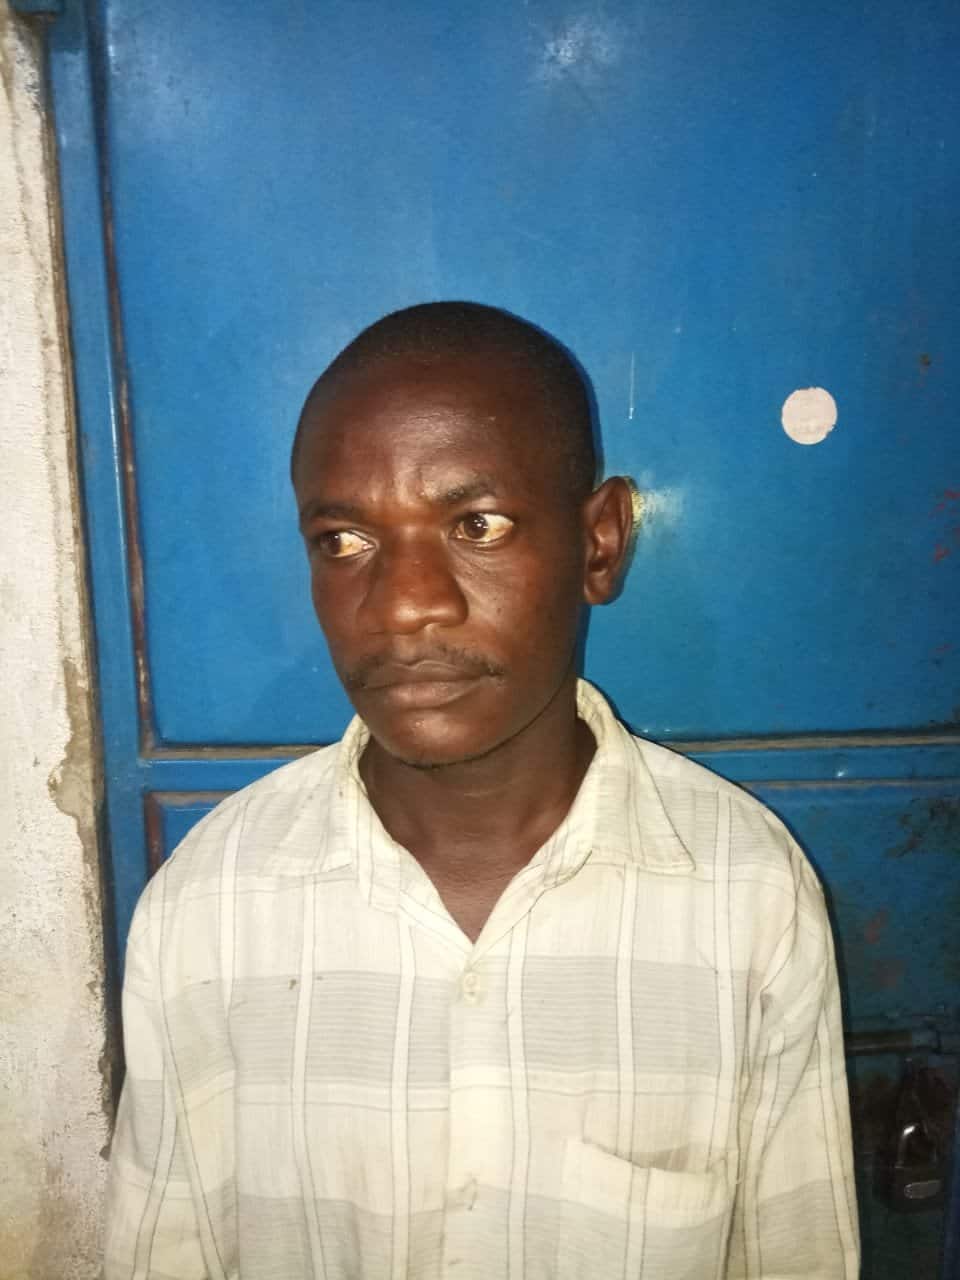 Man who fled after glueing wife's privates arrested at witchdoctor's home in Mwingi